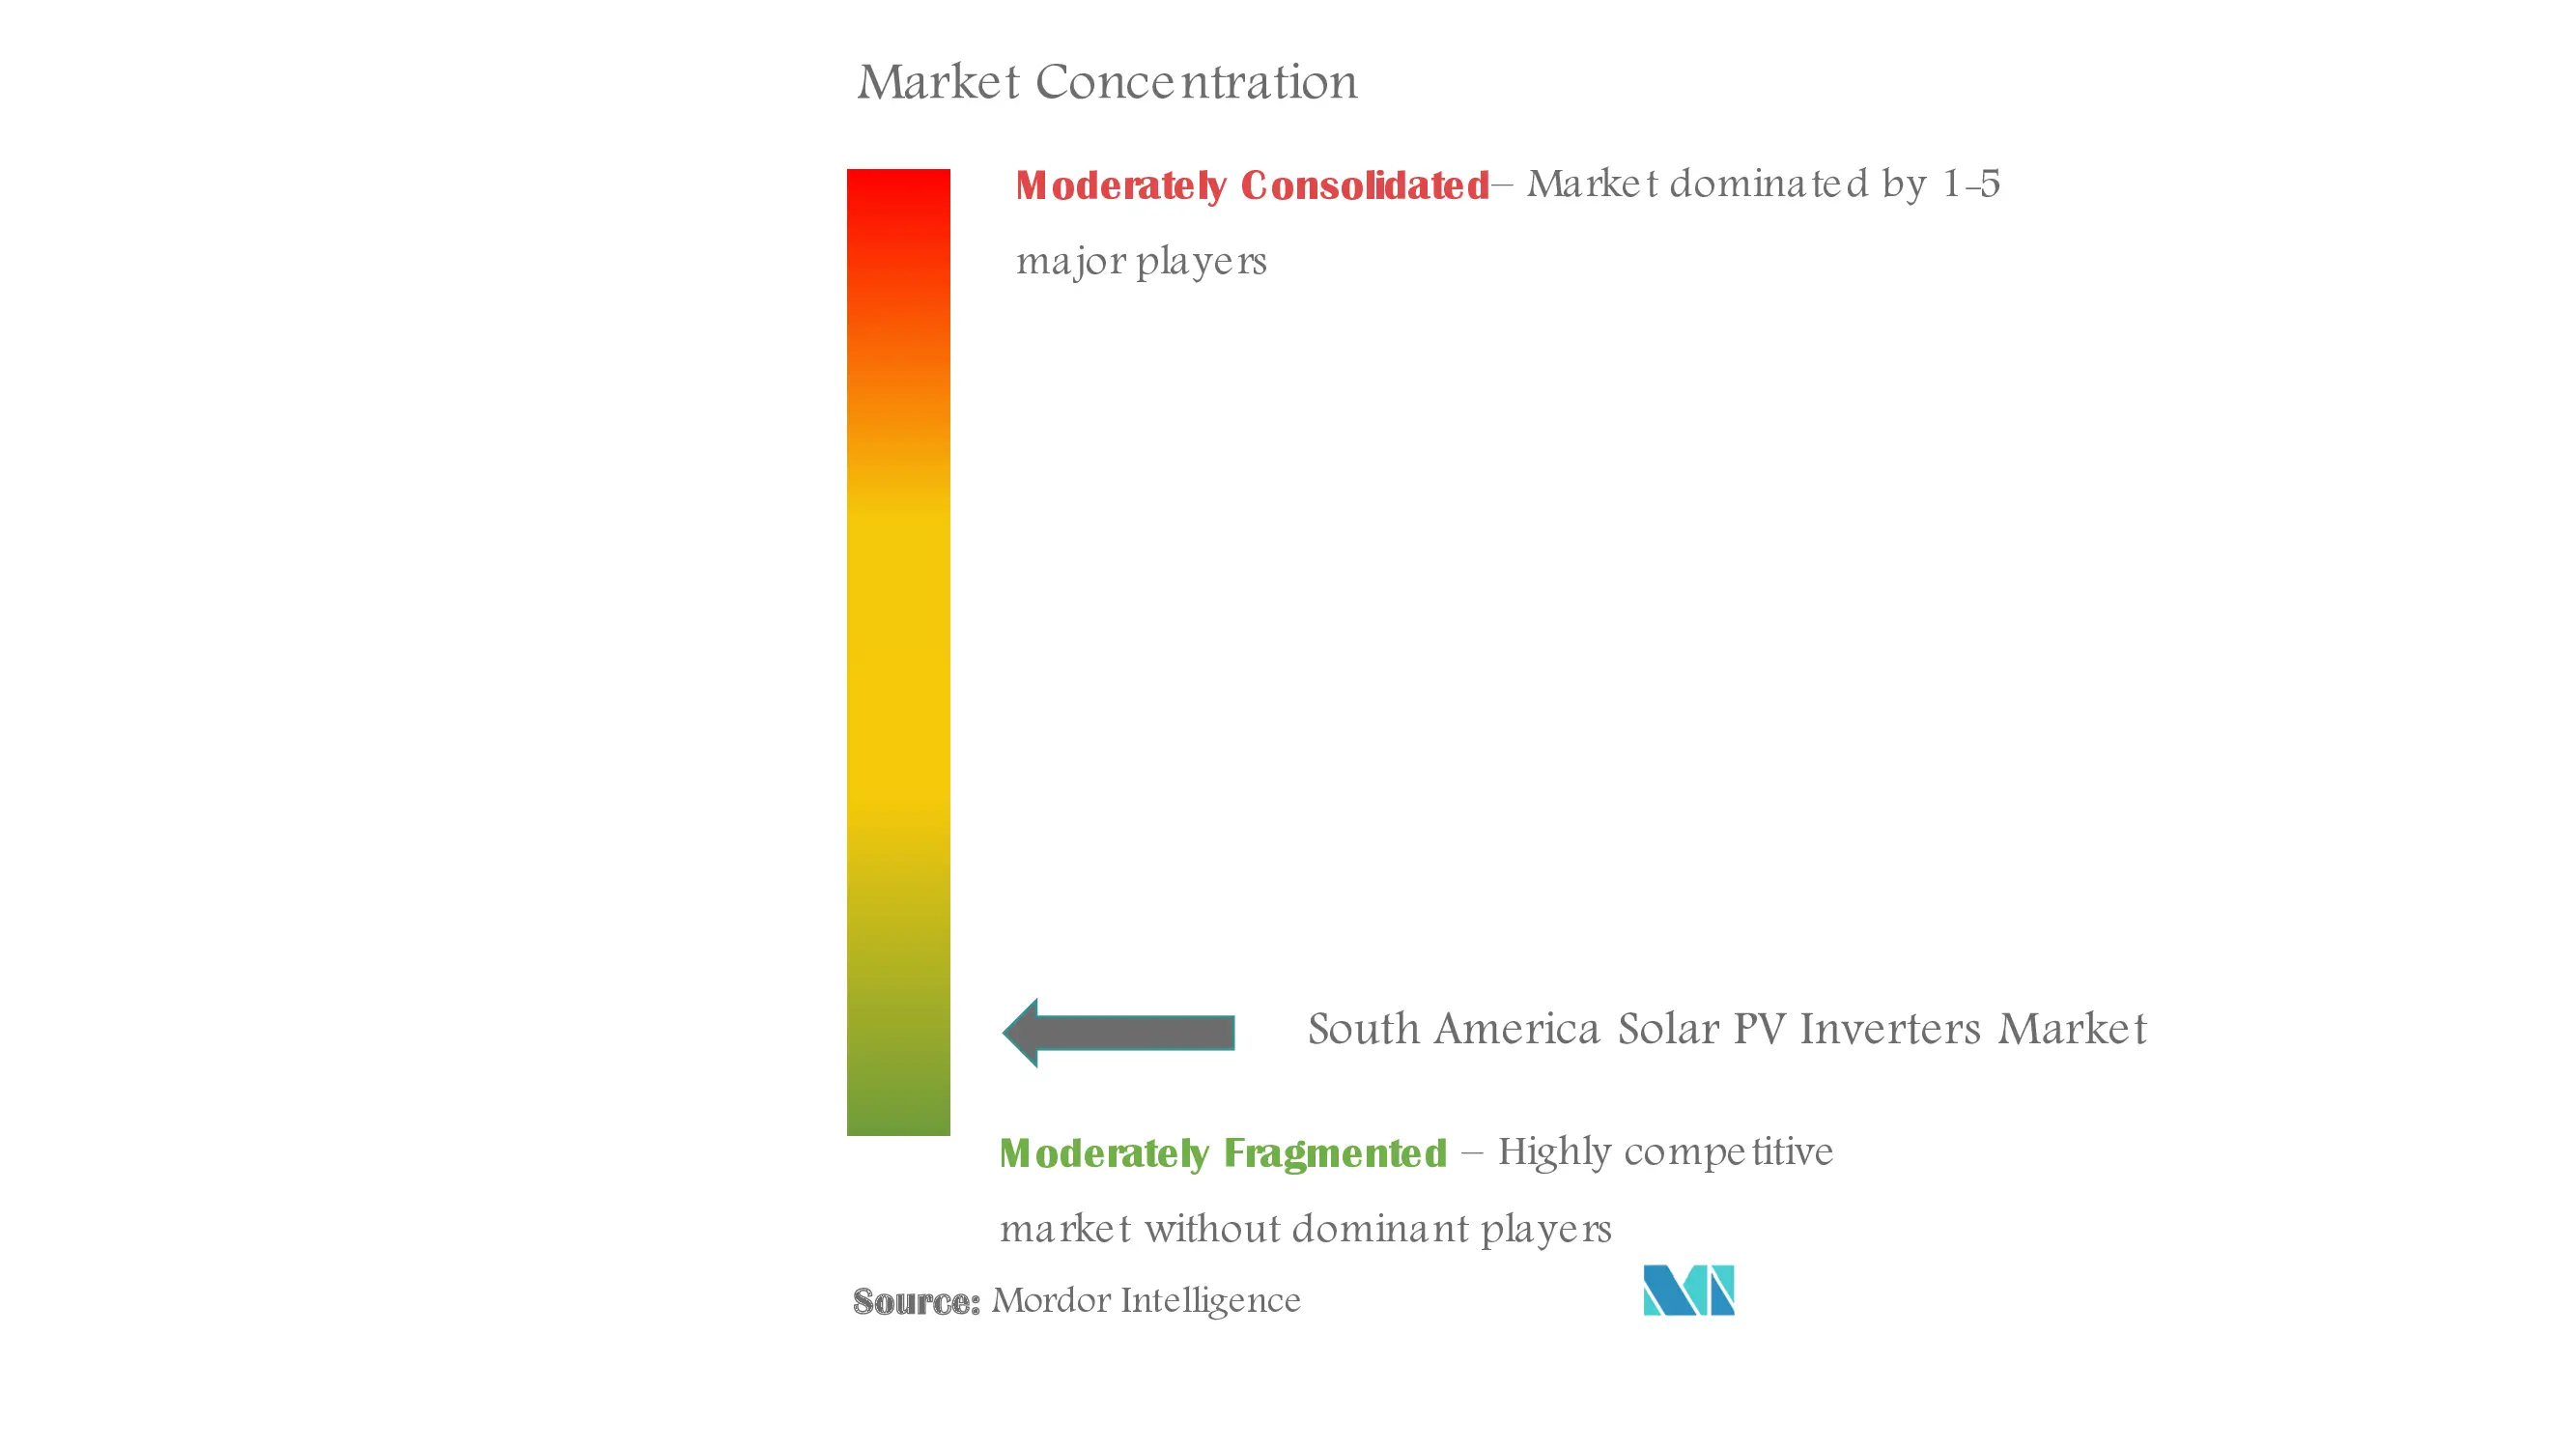 South America Solar PV Inverters Market Concentration